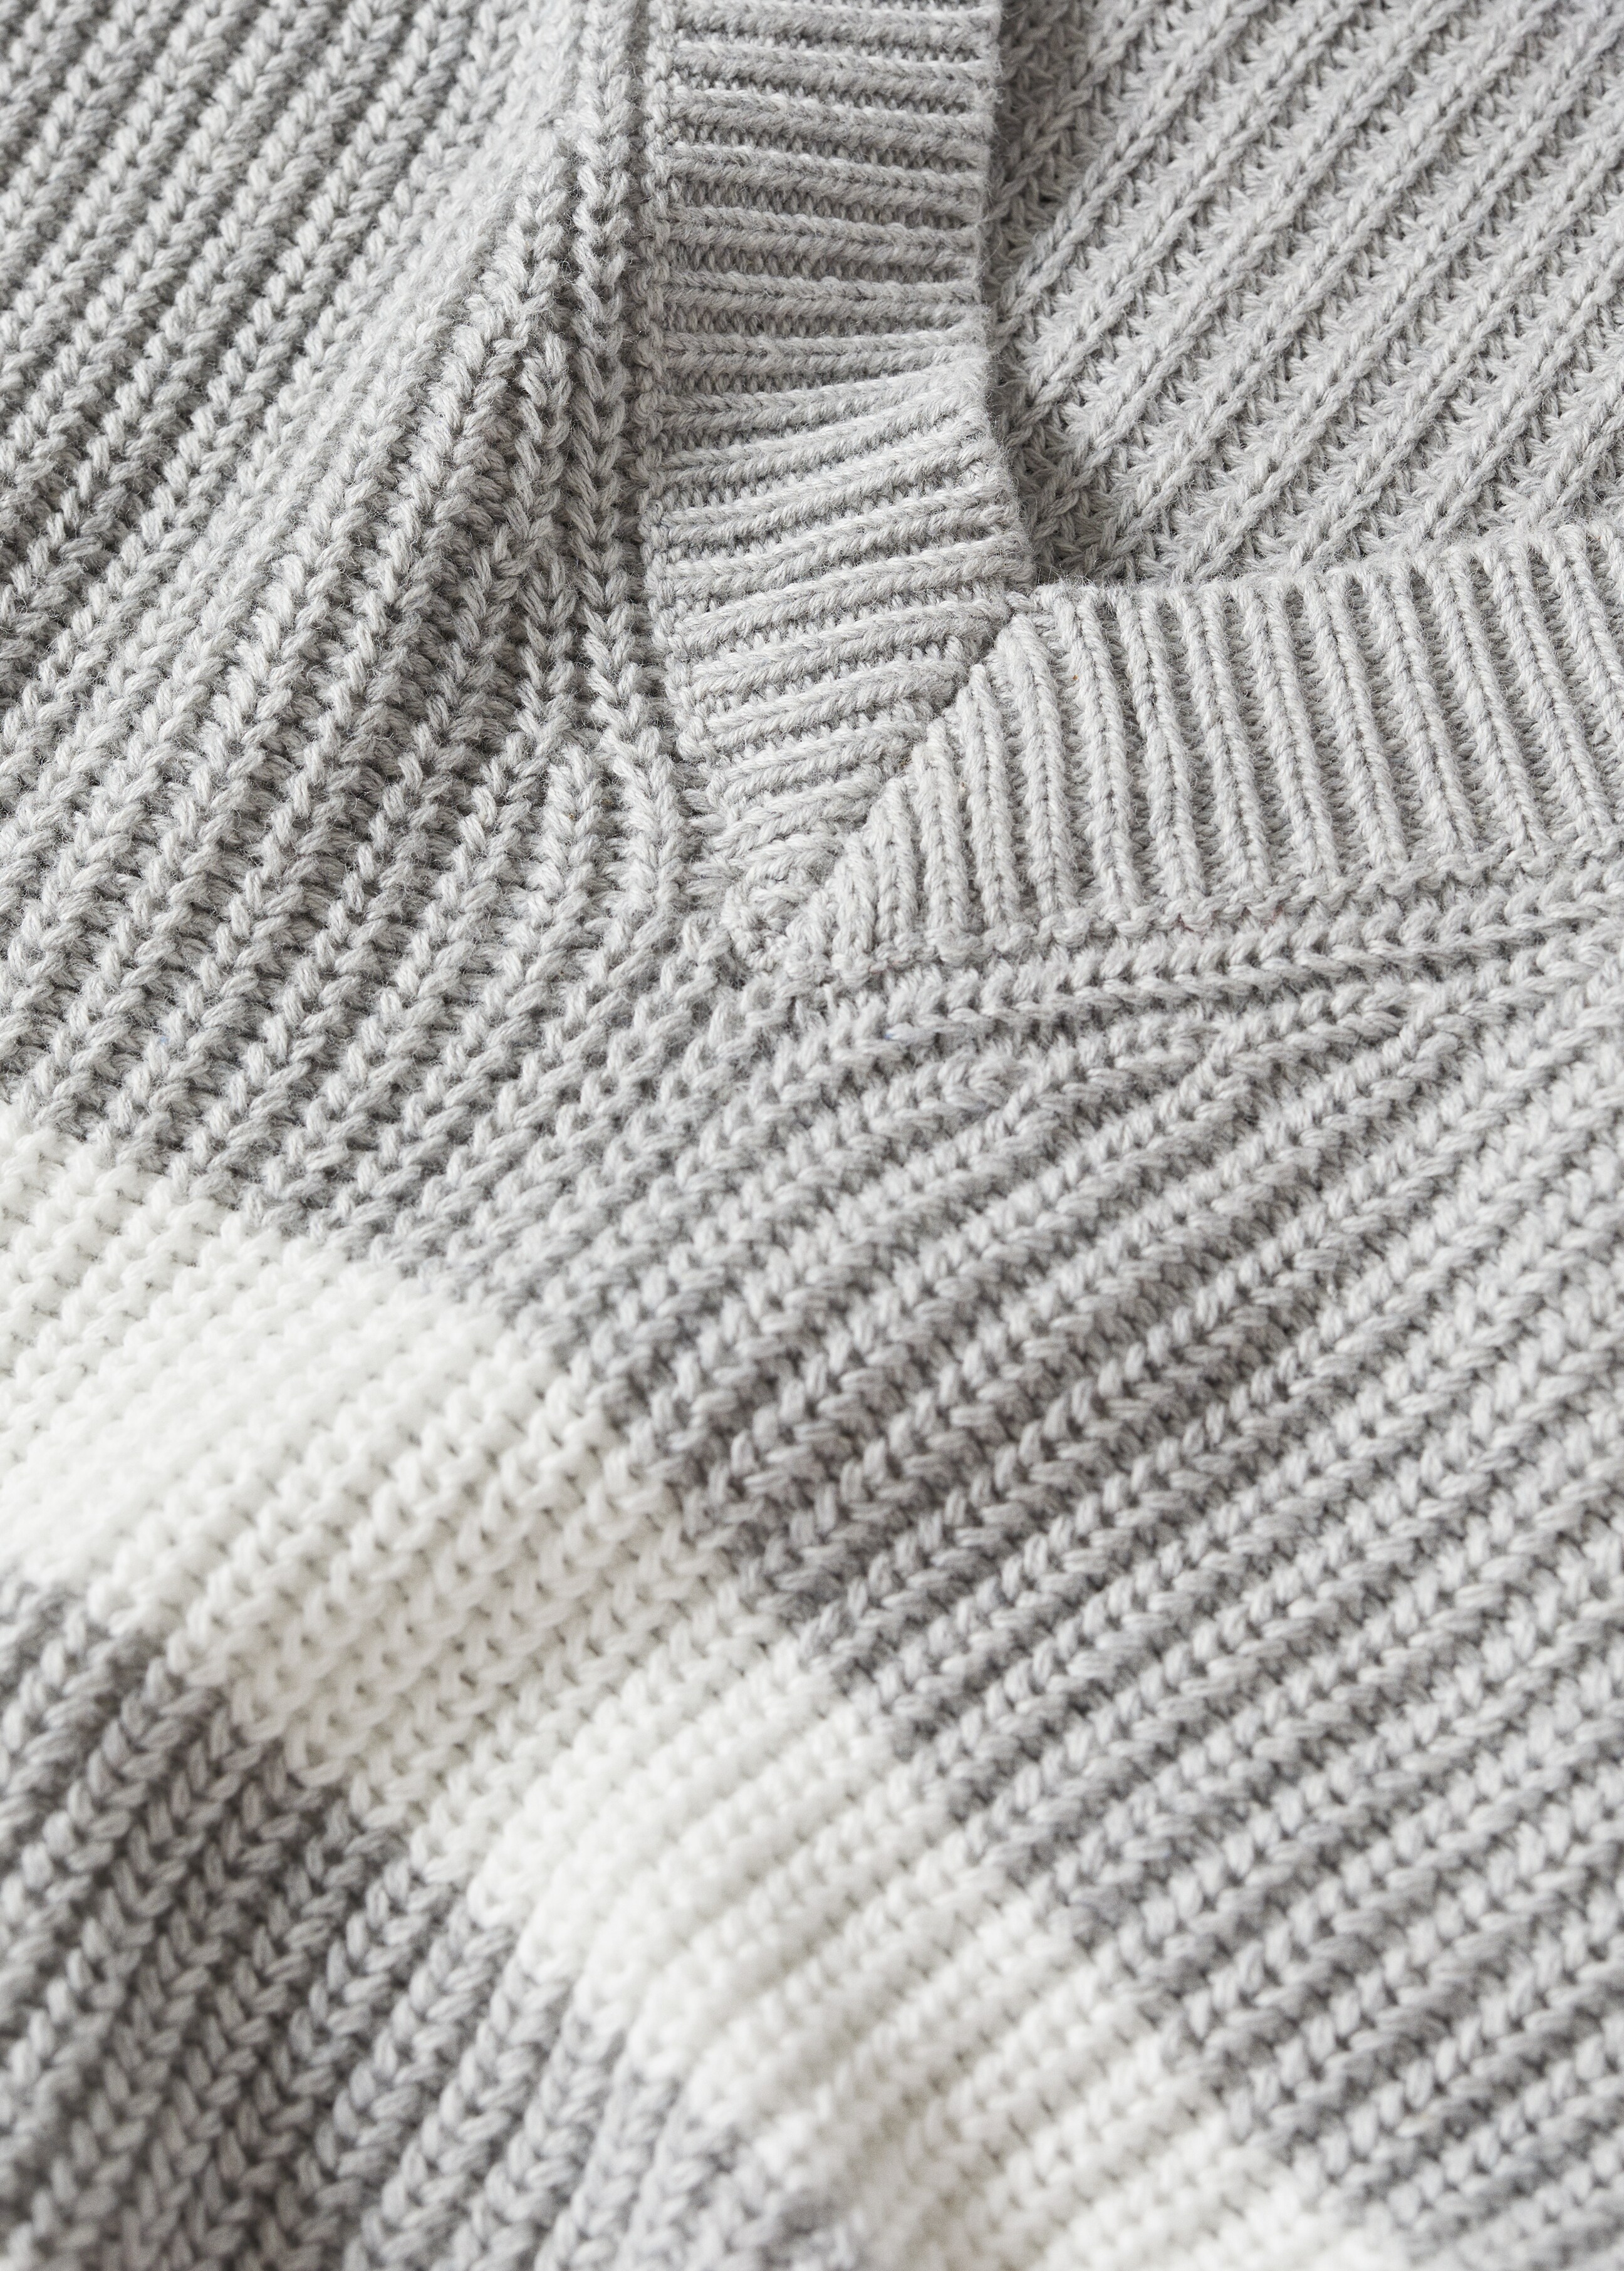 Knit cotton sweater - Details of the article 8